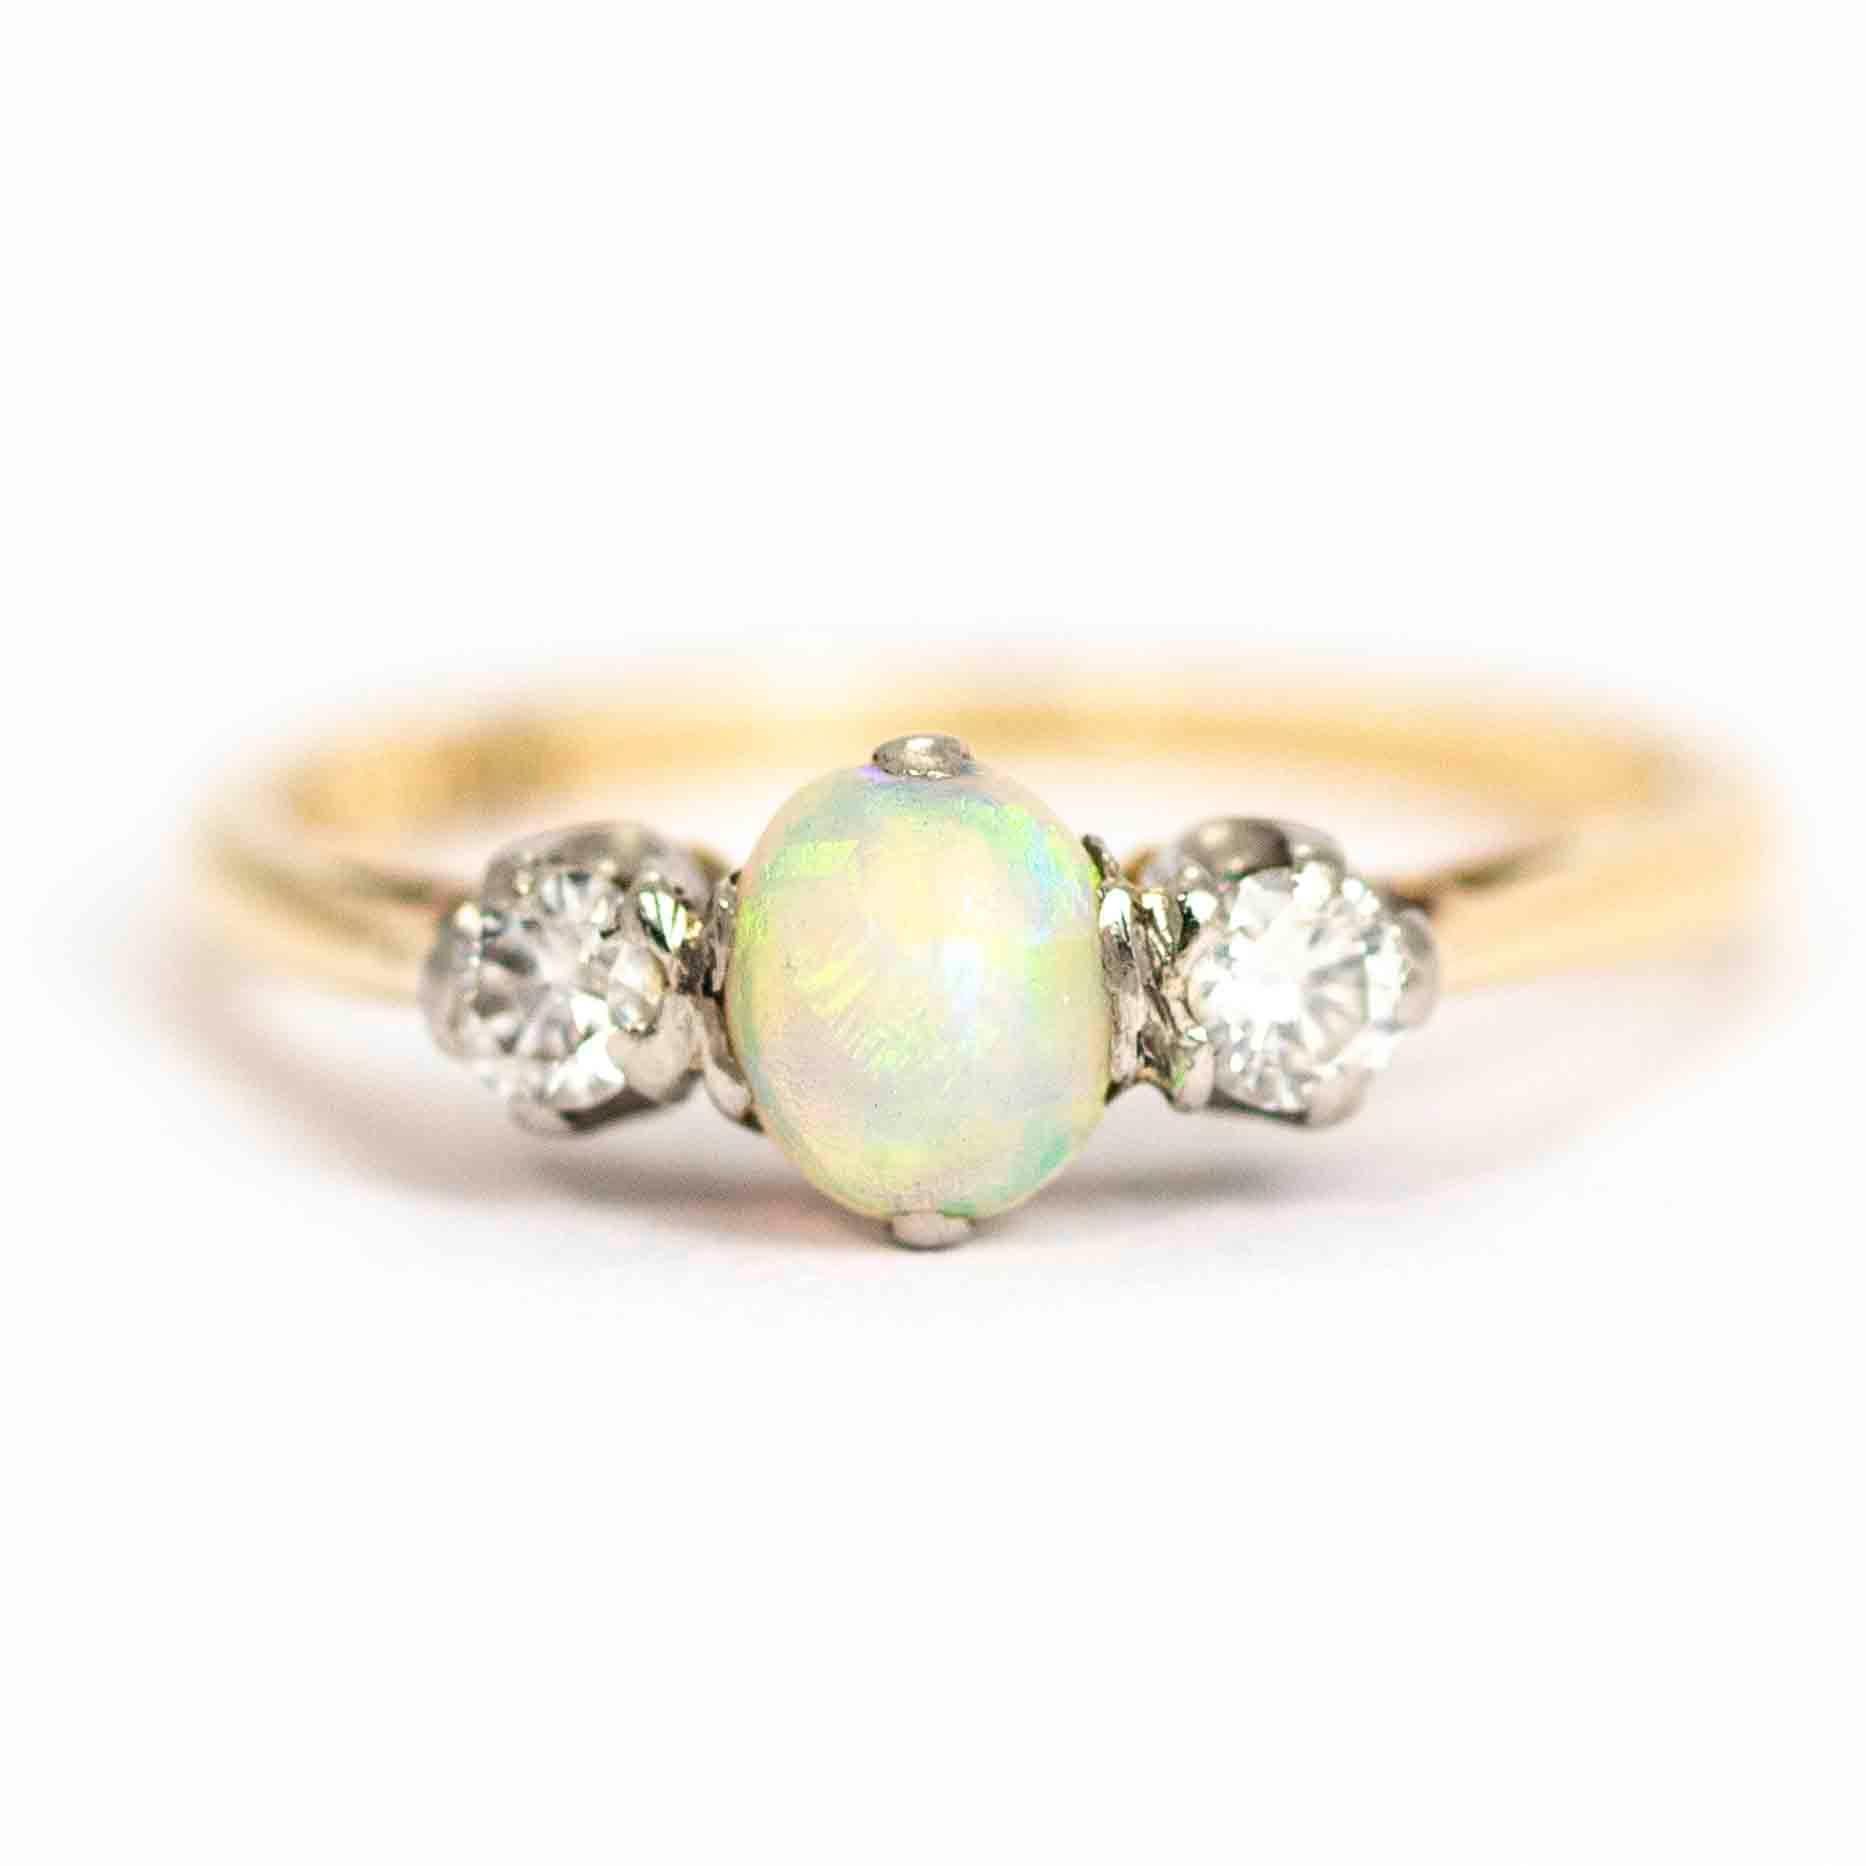 A wonderful vintage ring three-stone ring. The central cabochon cut opal has stunning colour, flanked by two round cut white diamonds measuring approximately 9 points each. The stones are set in platinum and the band is modelled in 18 carat yellow